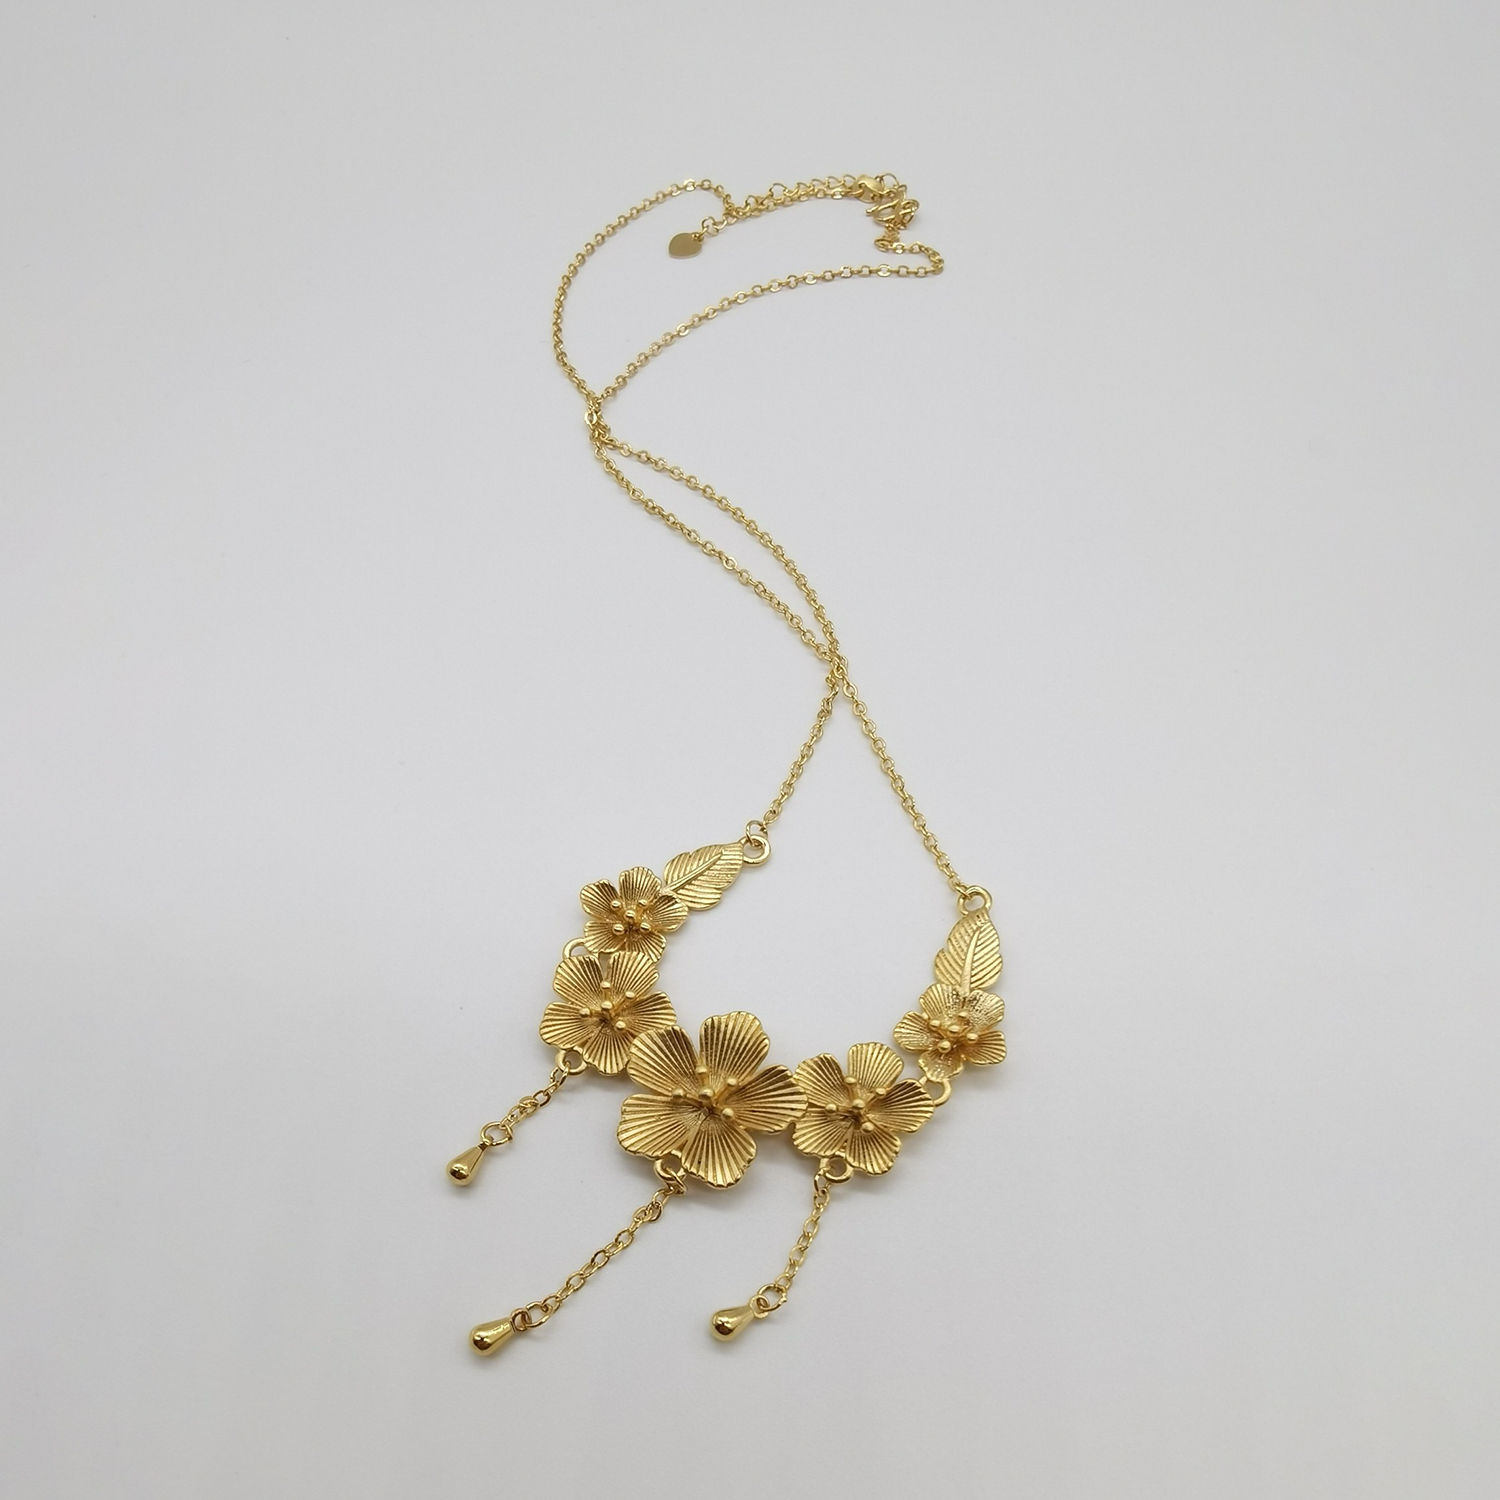 Alluvial gold vacuum electroplating 24K gold flowery tassel necklace